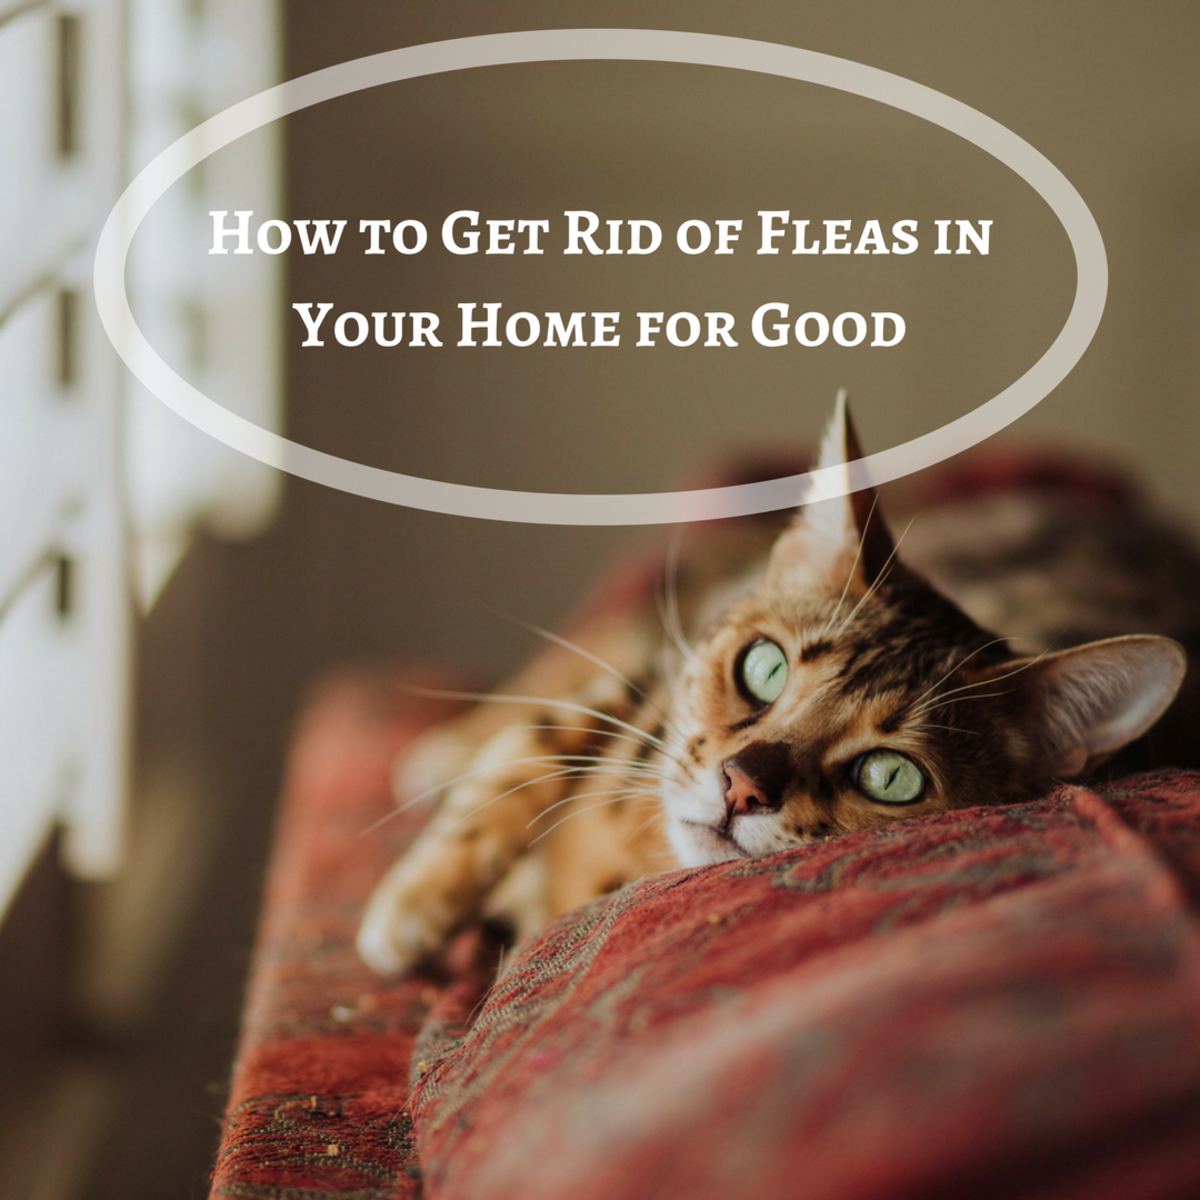 How to Get Rid of Fleas in Your Home for Good